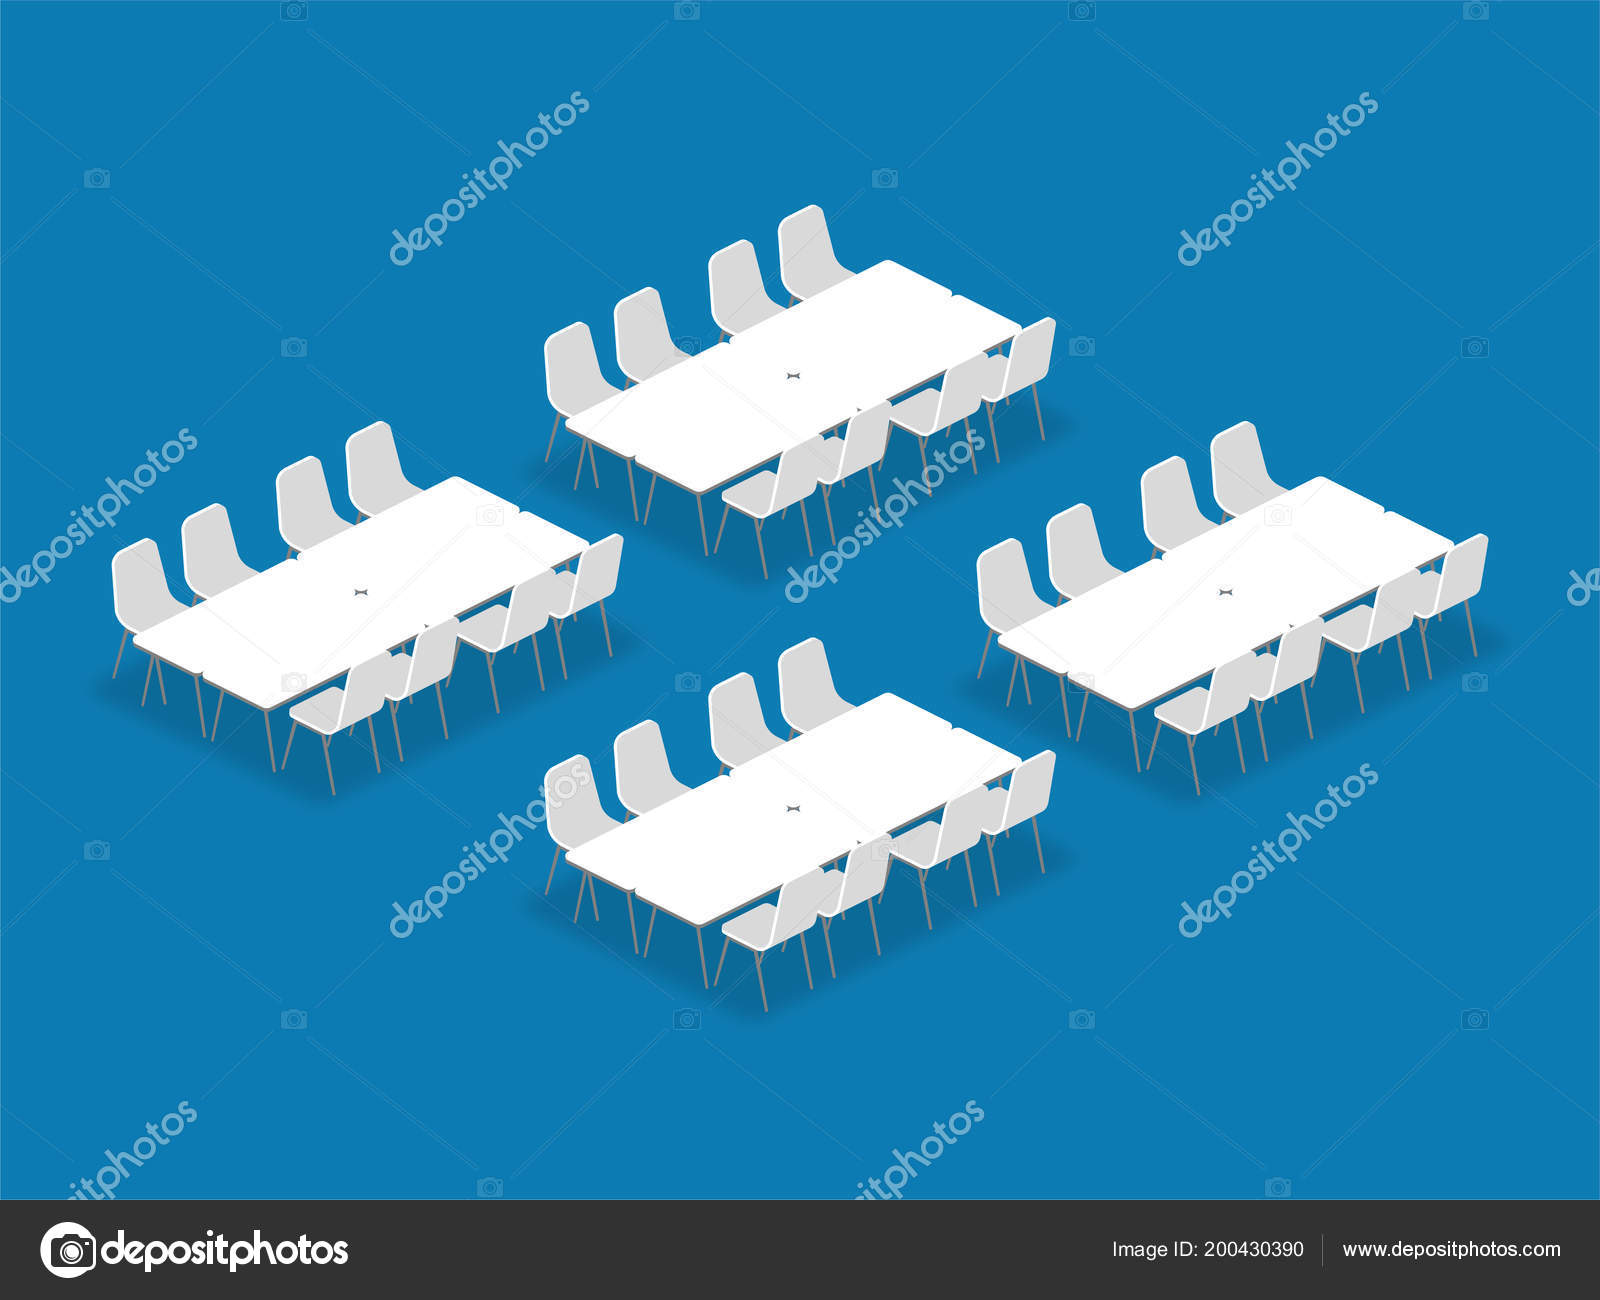 Meeting Room Setup Layout Configuration Banquet Isometric